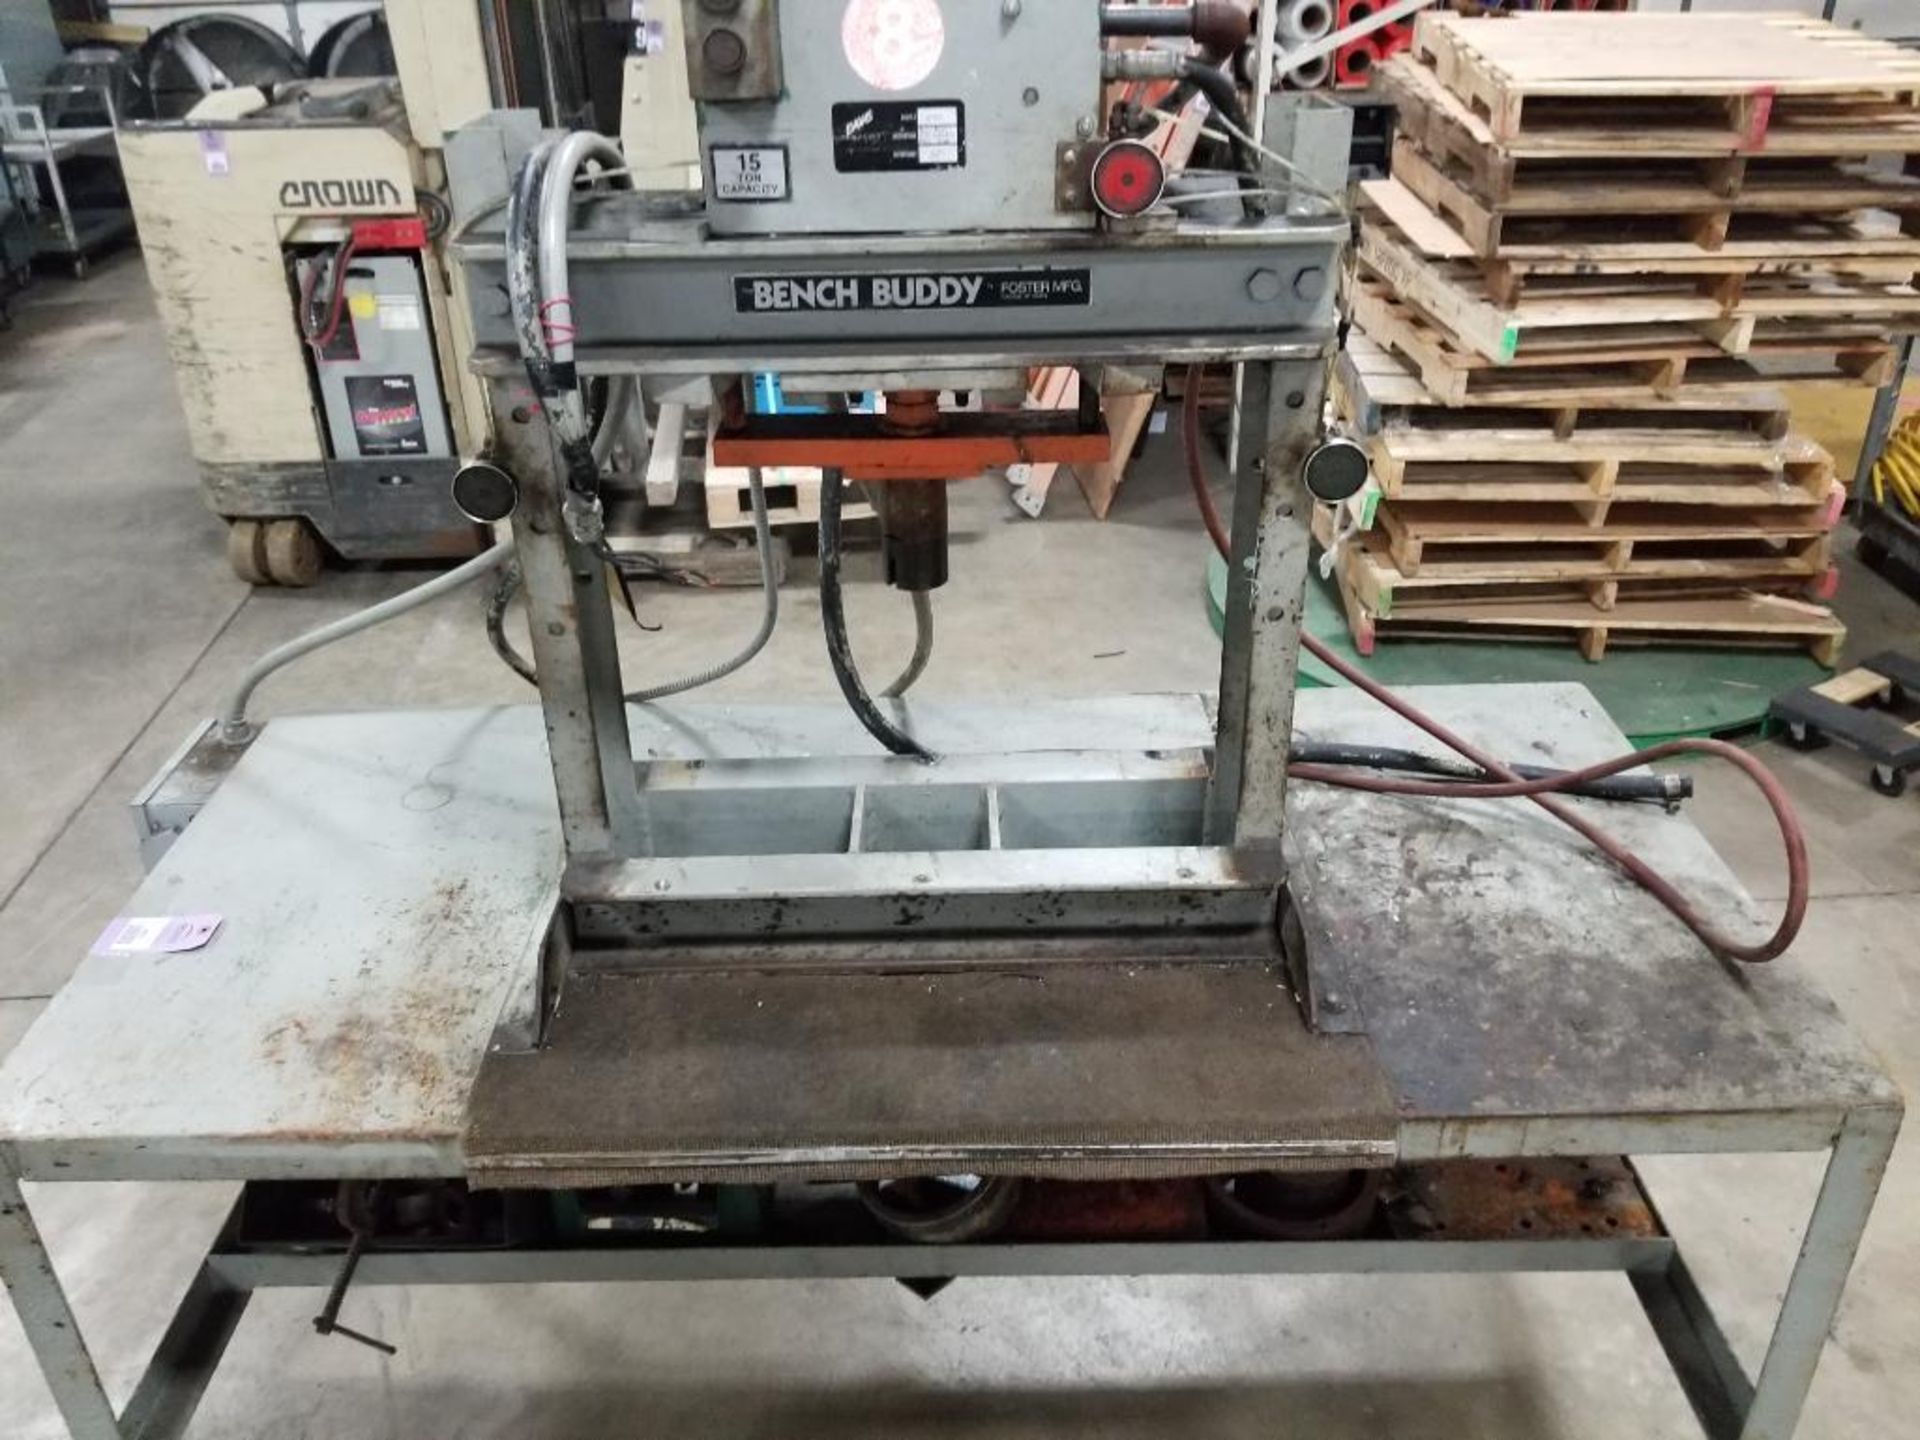 15 ton Bench Buddy hydraulic press with steel table.